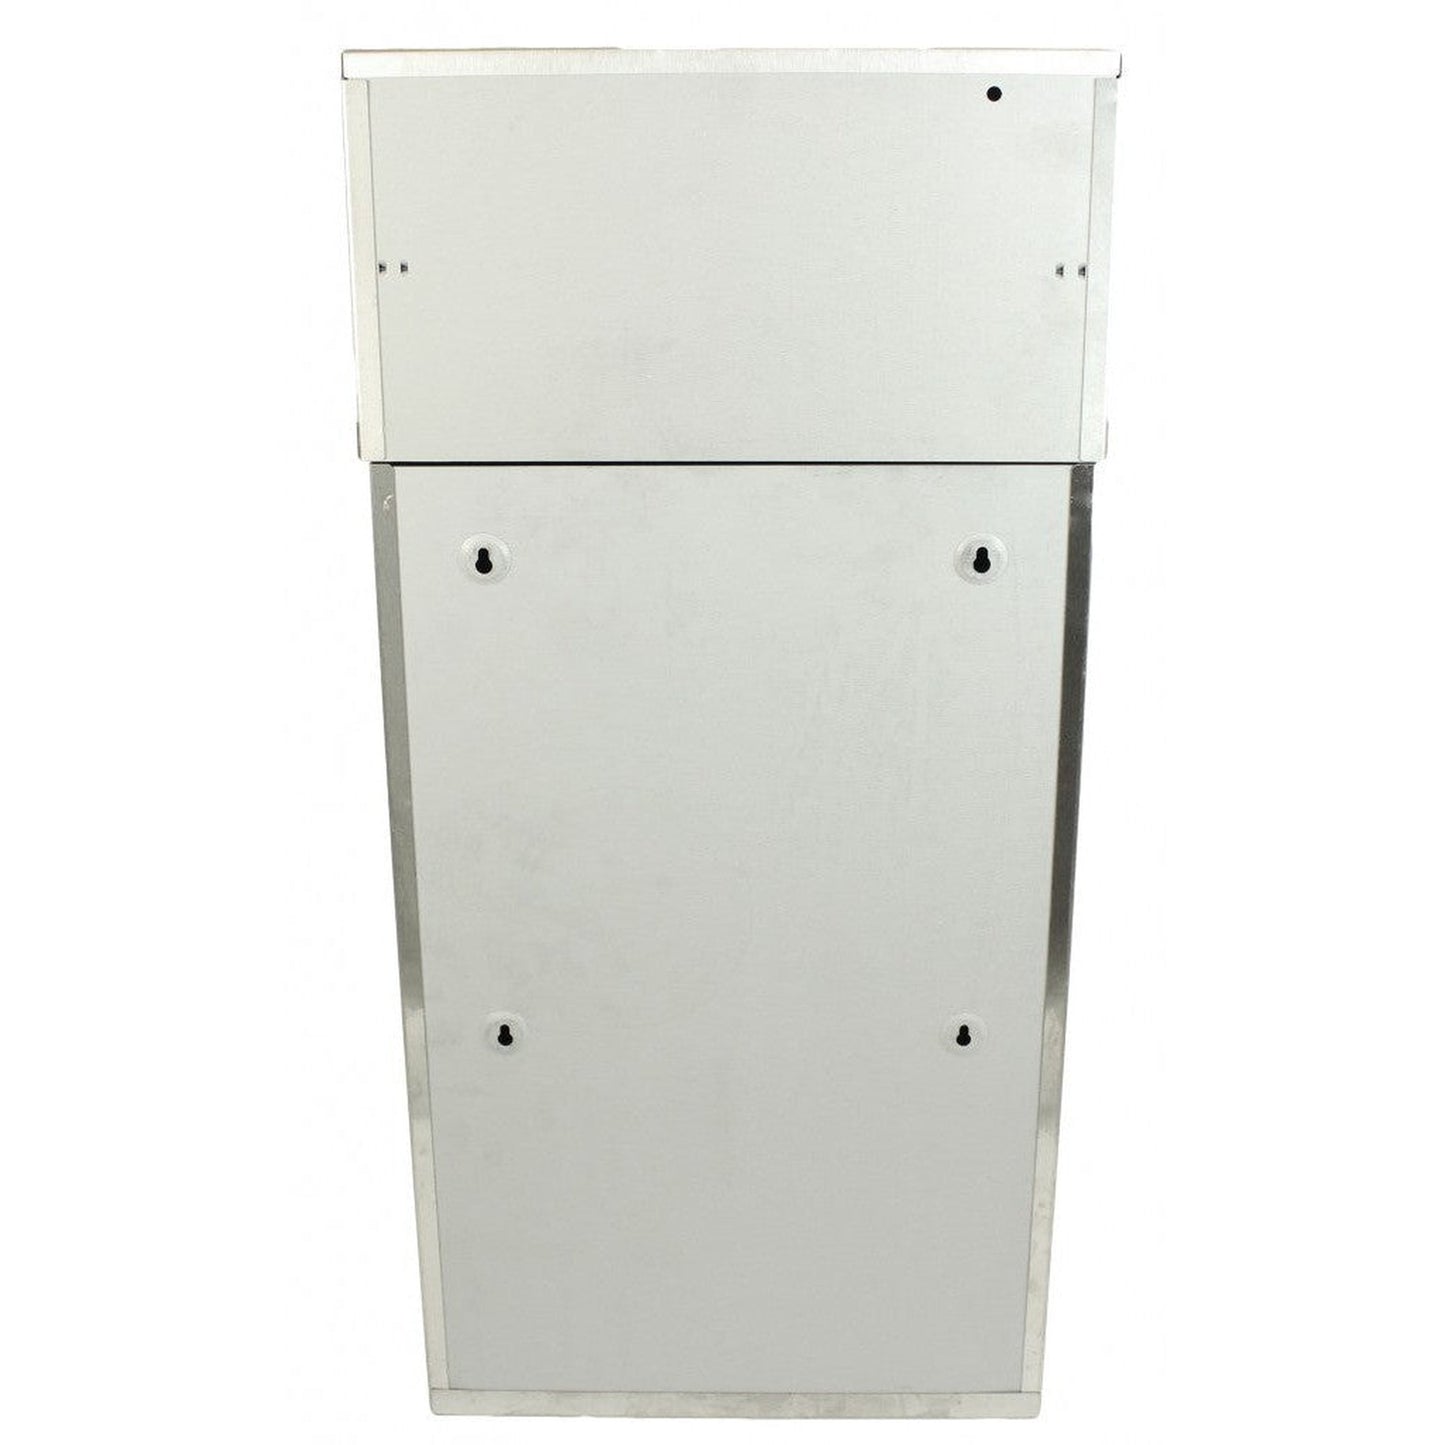 Frost 303-3 Wall Mounted Stainless Steel Waste Receptacle with Liner